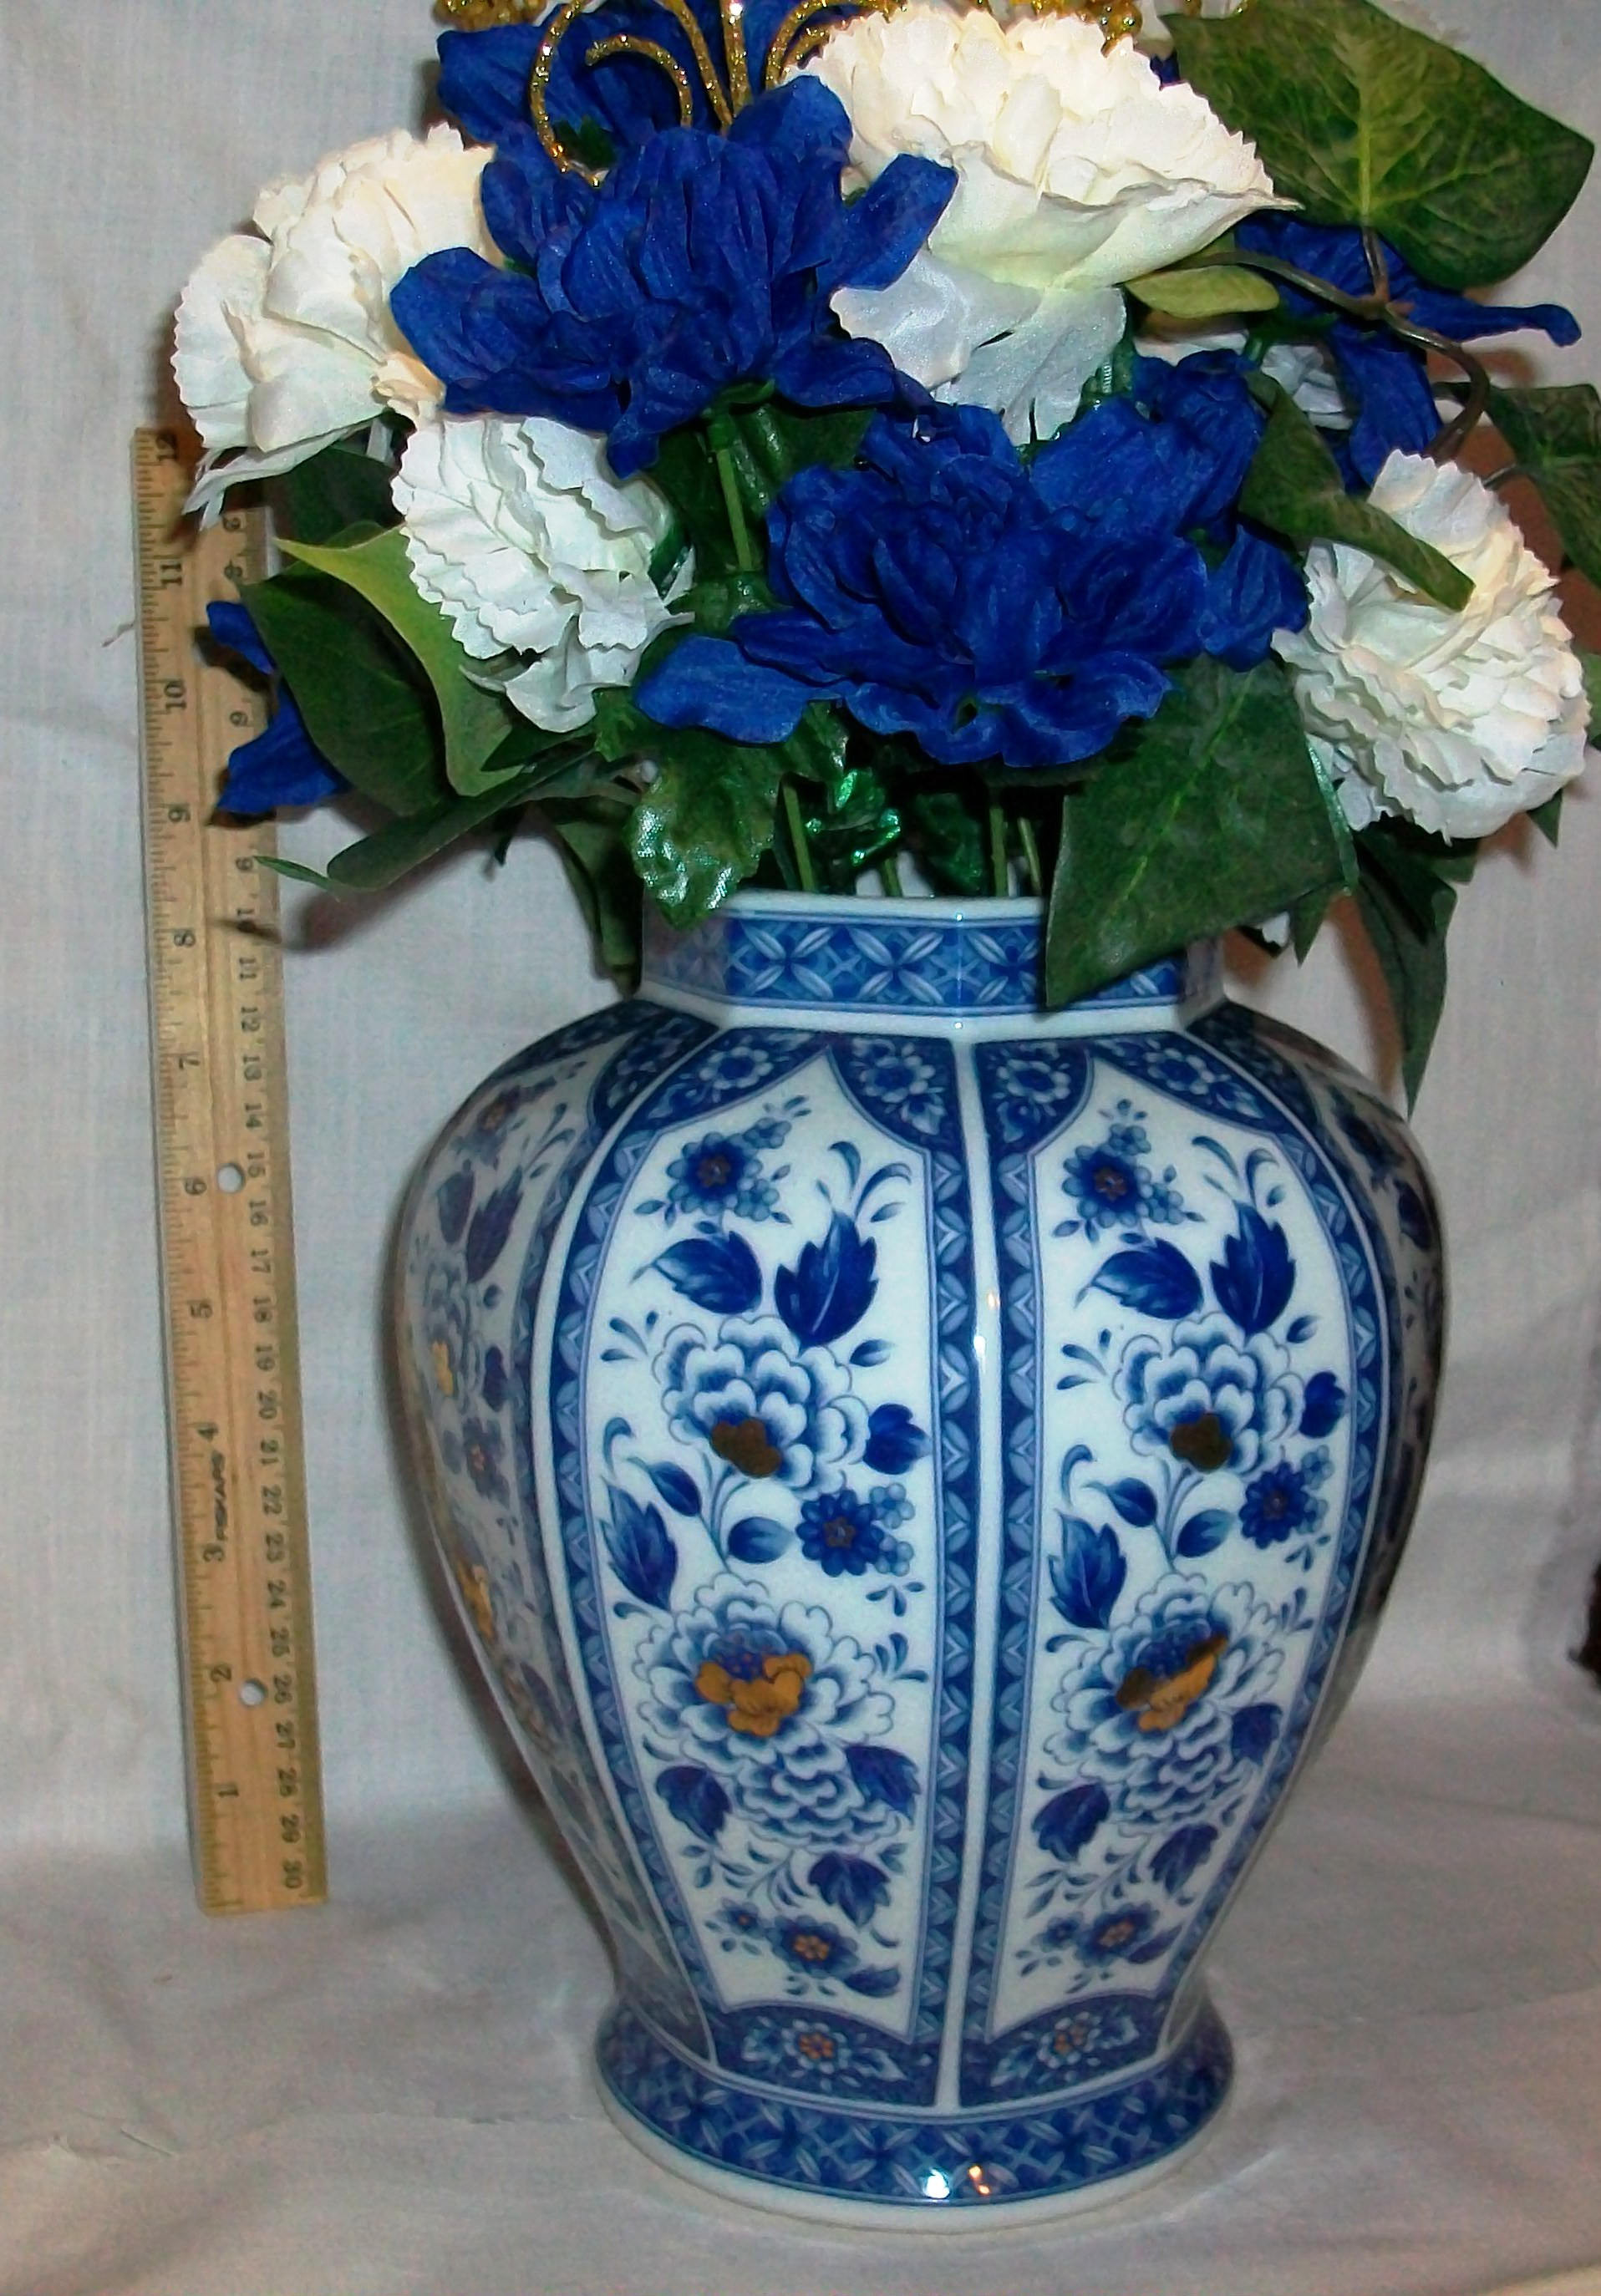 10 Nice White Pitcher Vase with Flowers 2023 free download white pitcher vase with flowers of listing 128 is an asian hand painted blue and gold vase regarding dc29fc294c28ezoom